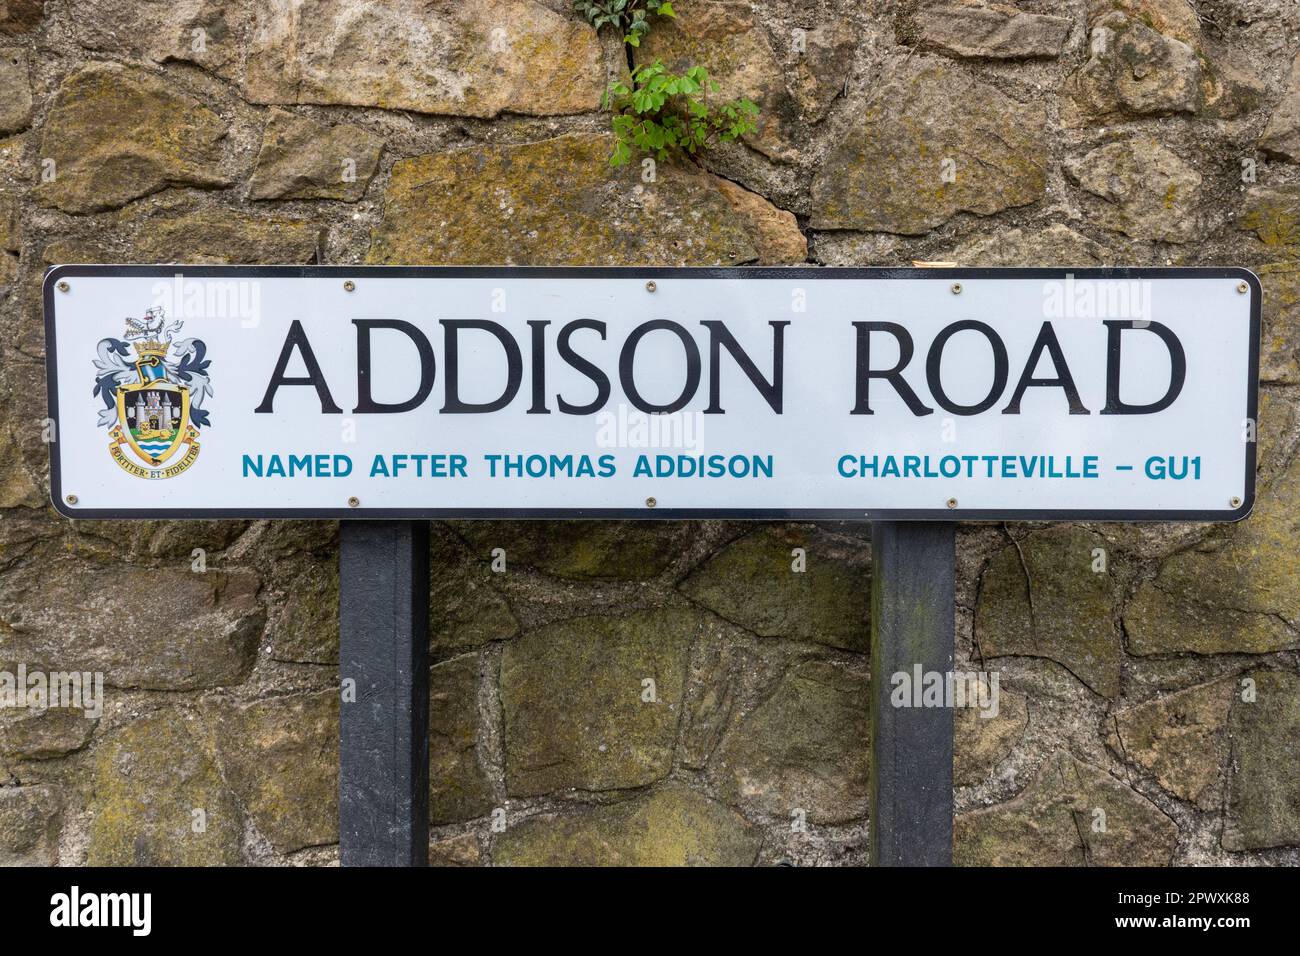 Addison Road, street sign in the Charlotteville area of Guildford, named after, Surrey, England, UK, named after the physician Dr Thomas Addison Stock Photo